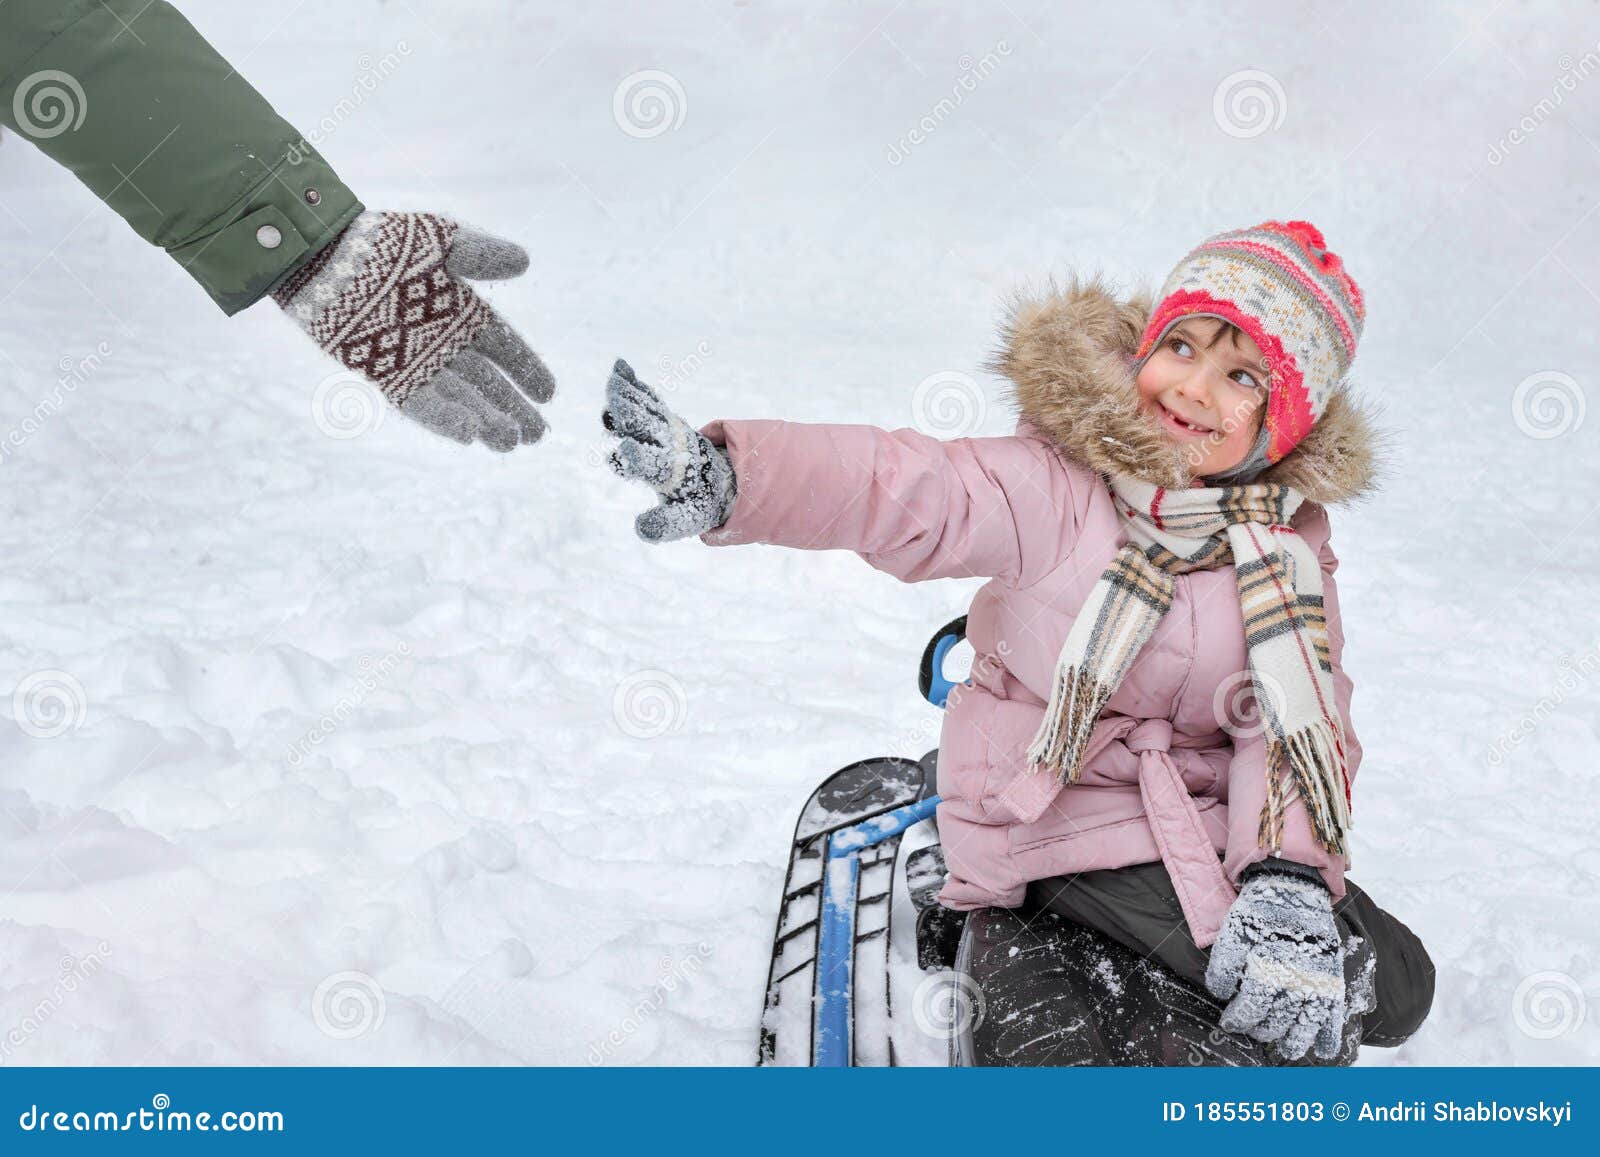 a happy toothless girl is sitting on a sledge in a winter park, reaching for an adultÃ¢â¬â¢s hand before touching